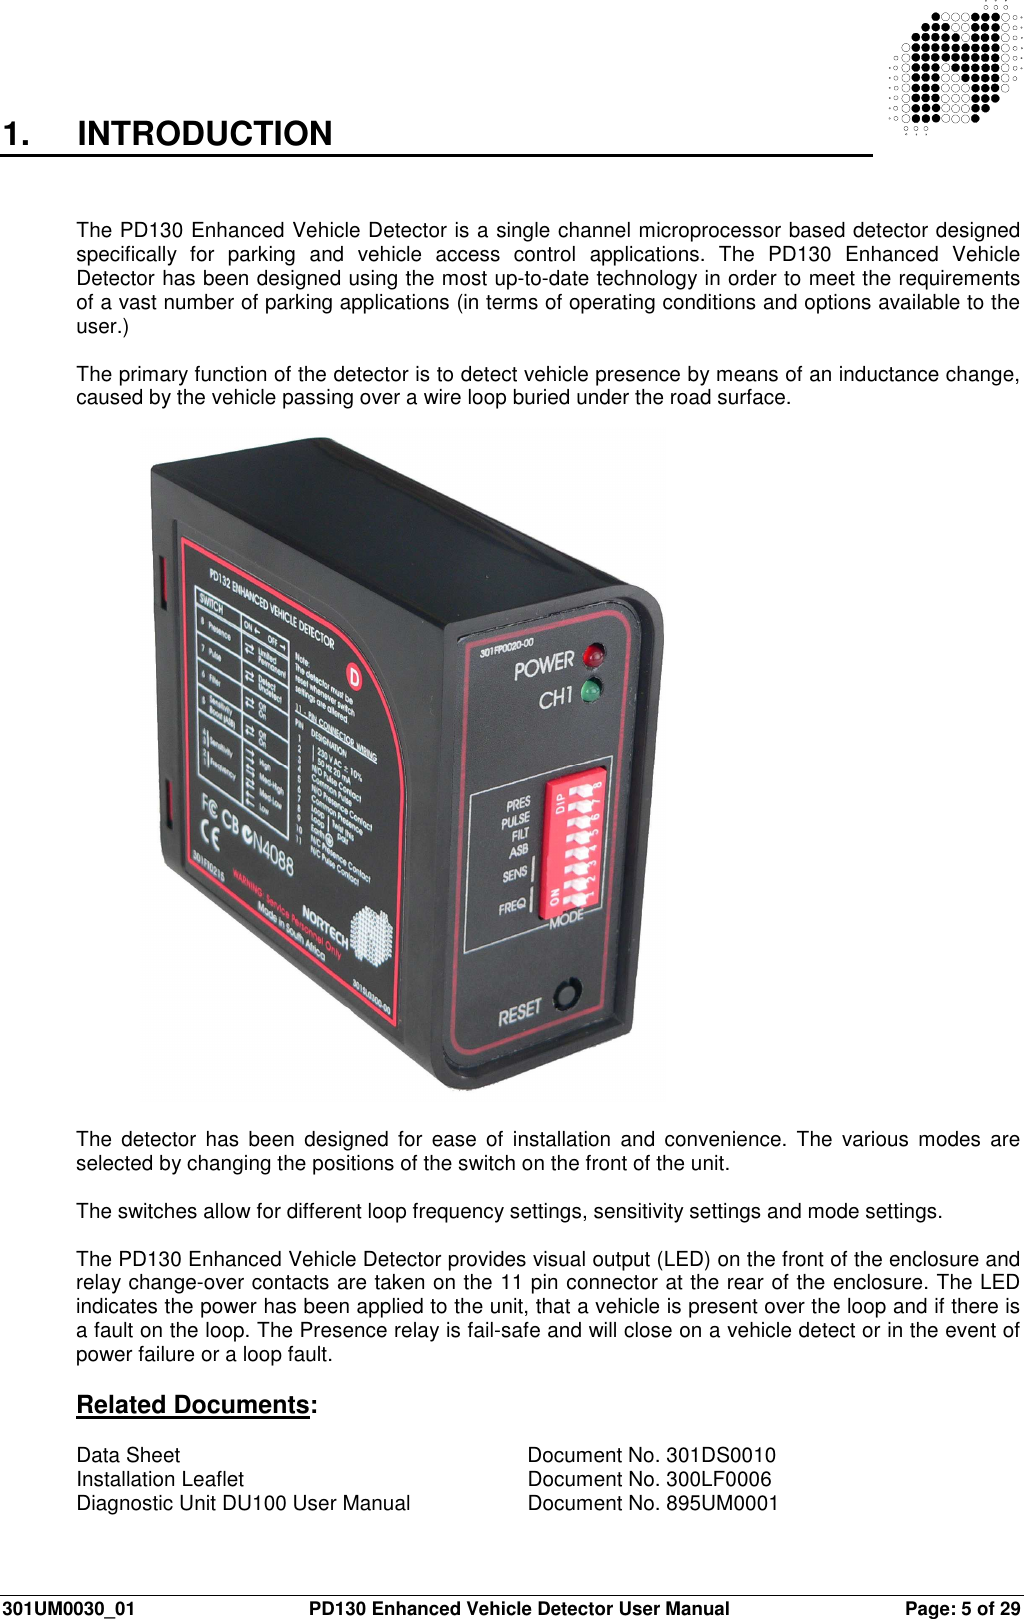  301UM0030_01  PD130 Enhanced Vehicle Detector User Manual  Page: 5 of 29   1.  INTRODUCTION   The PD130 Enhanced Vehicle Detector is a single channel microprocessor based detector designed specifically  for  parking  and  vehicle  access  control  applications.  The  PD130  Enhanced  Vehicle Detector has been designed using the most up-to-date technology in order to meet the requirements of a vast number of parking applications (in terms of operating conditions and options available to the user.)  The primary function of the detector is to detect vehicle presence by means of an inductance change, caused by the vehicle passing over a wire loop buried under the road surface.  The  detector  has  been  designed  for  ease  of  installation  and  convenience.  The  various  modes  are selected by changing the positions of the switch on the front of the unit.  The switches allow for different loop frequency settings, sensitivity settings and mode settings.  The PD130 Enhanced Vehicle Detector provides visual output (LED) on the front of the enclosure and relay change-over contacts are taken on the 11 pin connector at the rear of the enclosure. The LED indicates the power has been applied to the unit, that a vehicle is present over the loop and if there is a fault on the loop. The Presence relay is fail-safe and will close on a vehicle detect or in the event of power failure or a loop fault.  Related Documents:  Data Sheet           Document No. 301DS0010 Installation Leaflet        Document No. 300LF0006 Diagnostic Unit DU100 User Manual     Document No. 895UM0001  